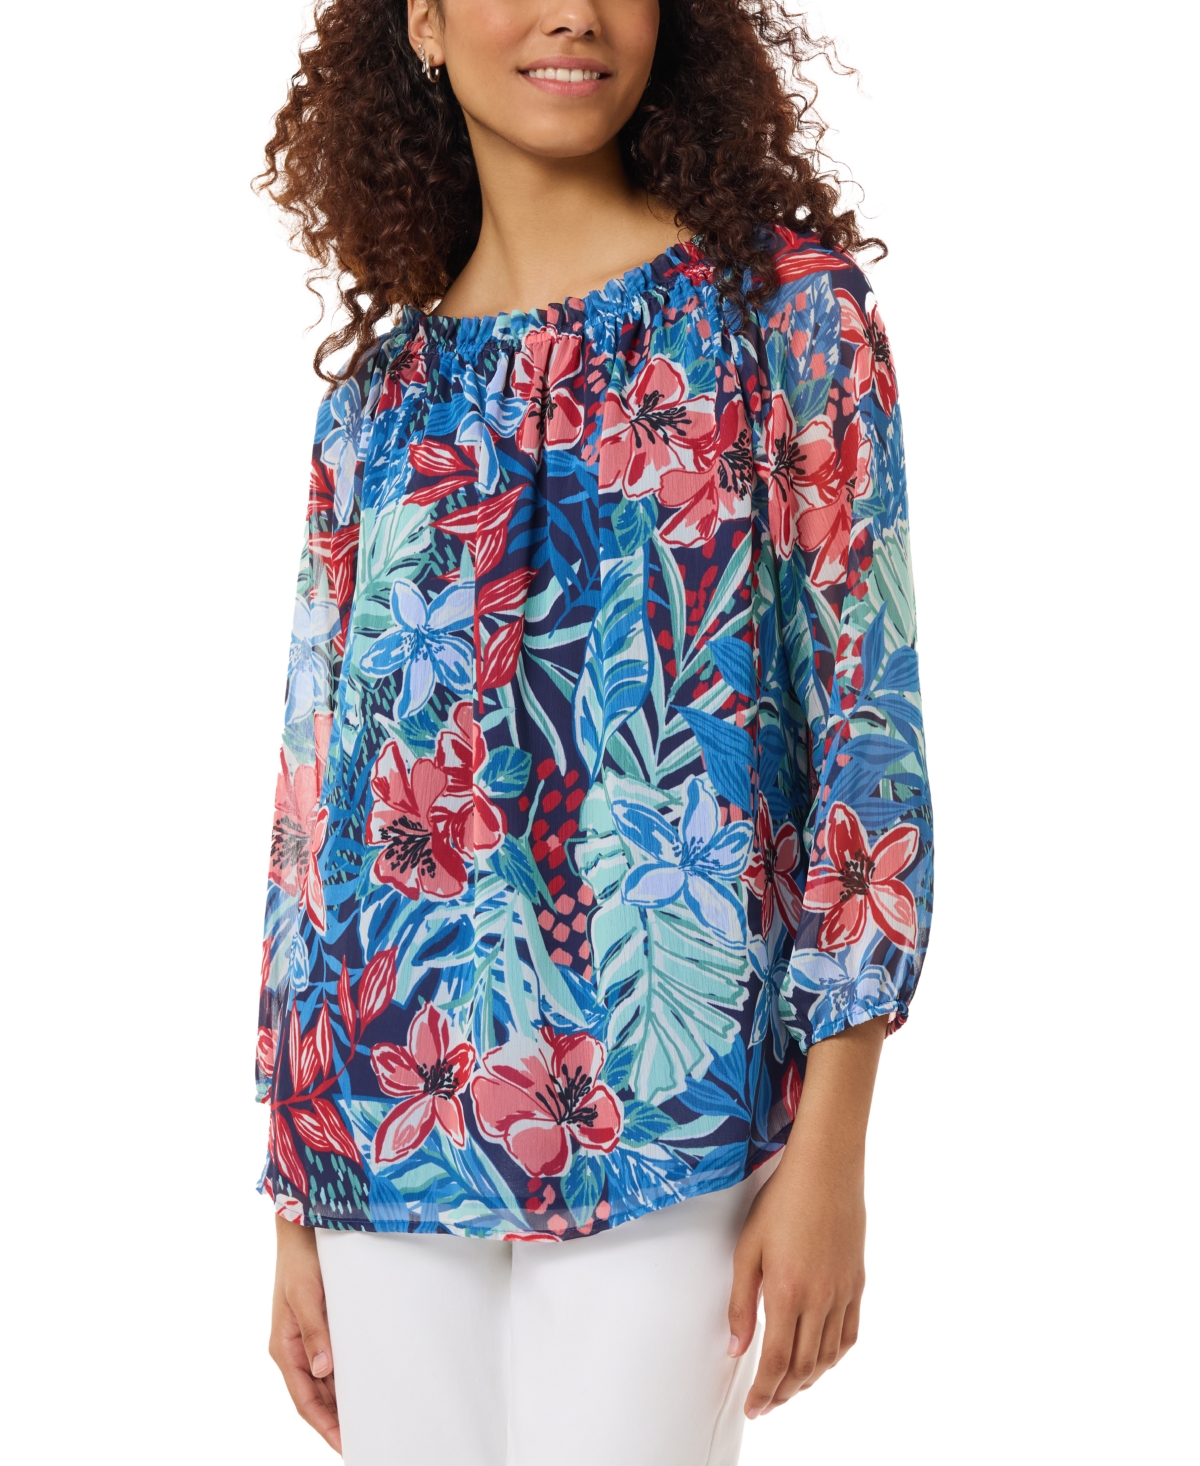 Women's Printed Smocked-Neck Blouse - Pacific Navy